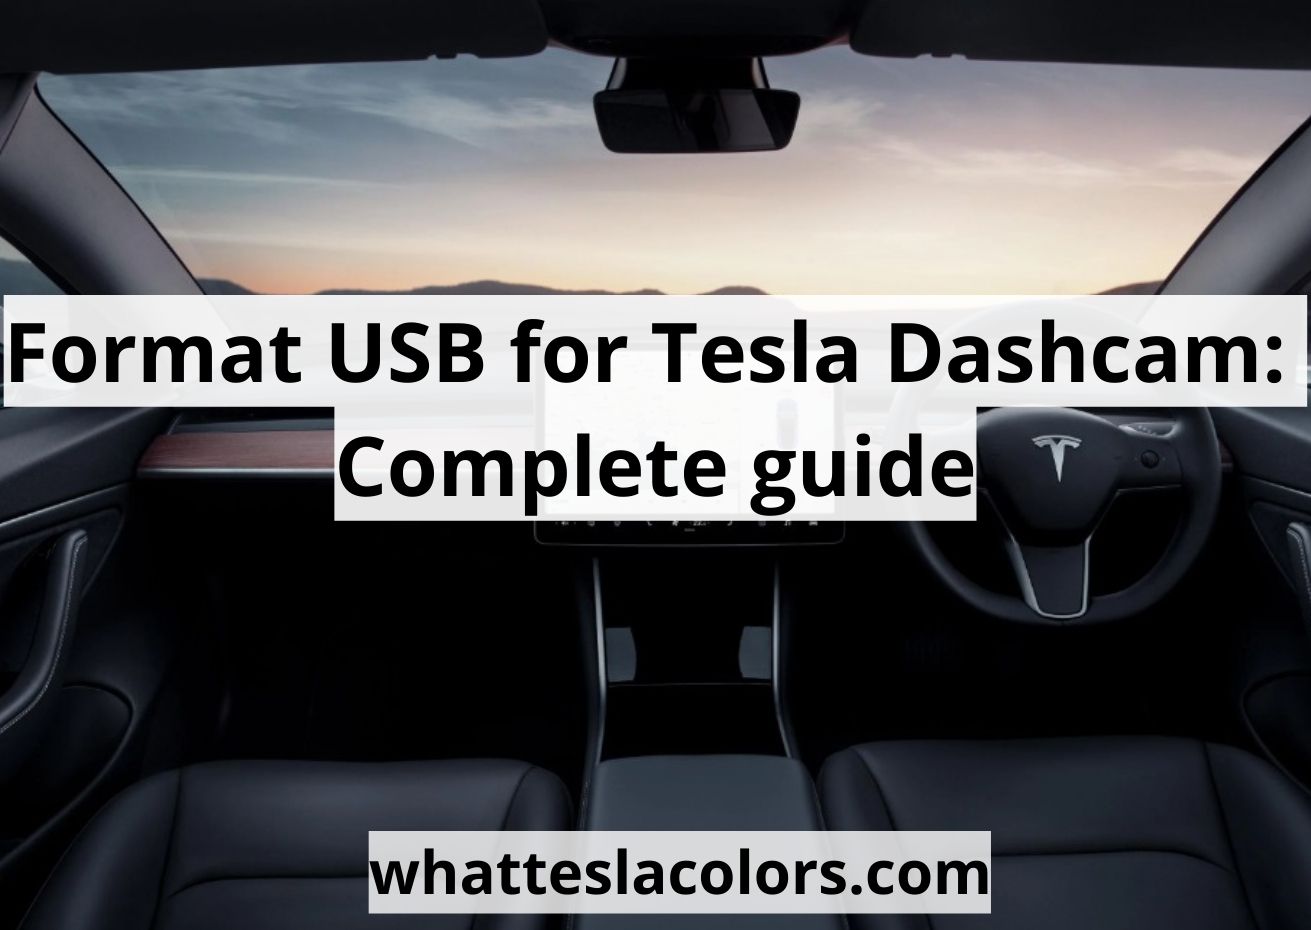 How to format USB for Tesla Dashcam: the best guide